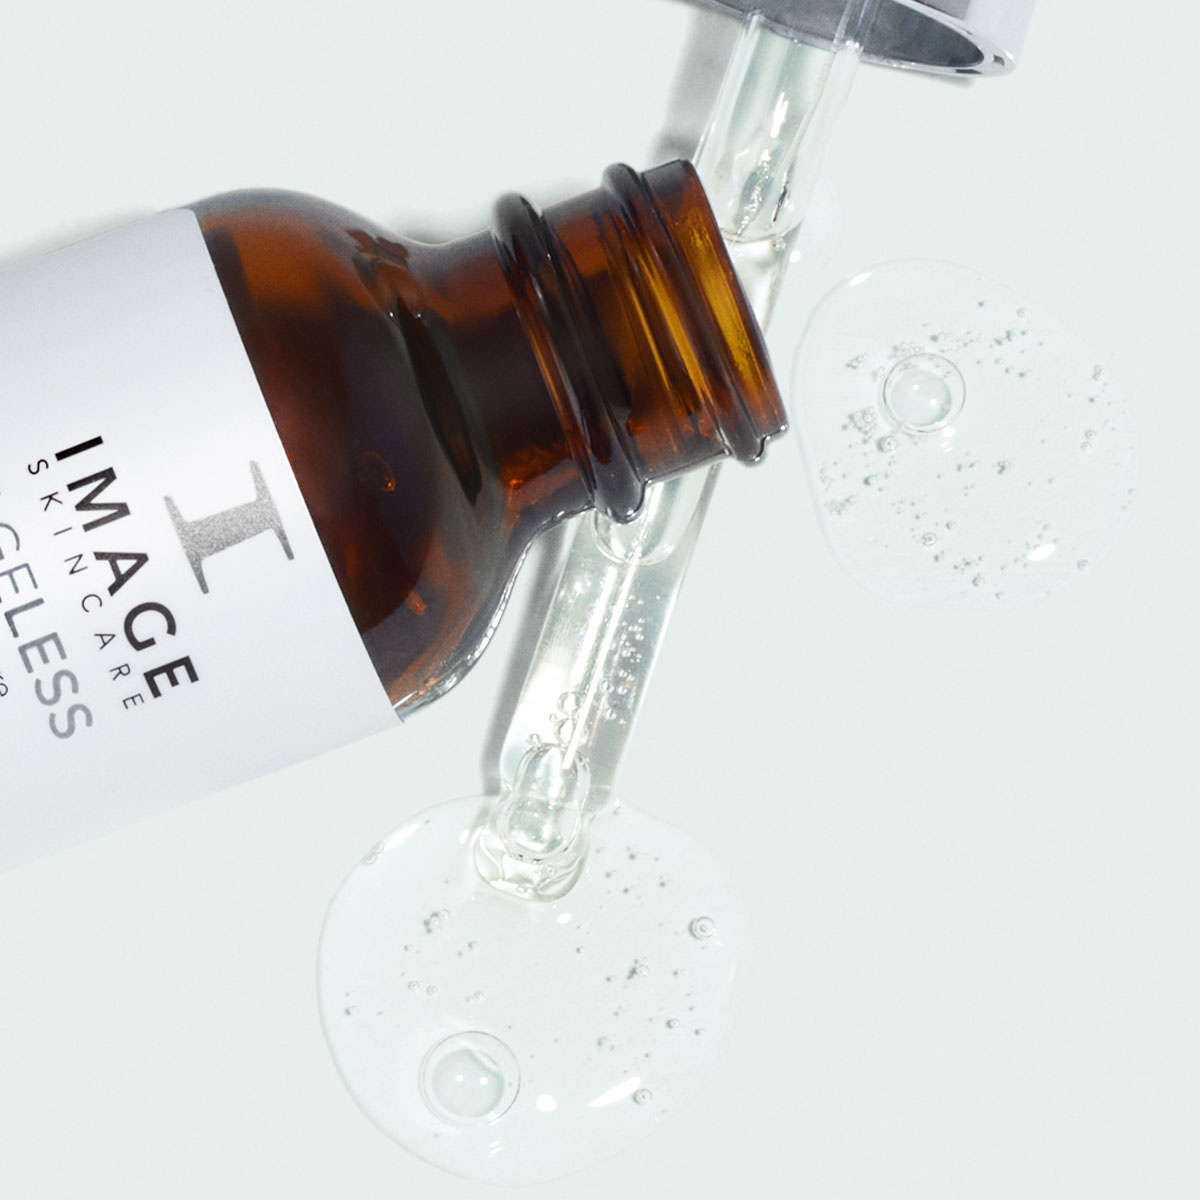 IMAGE Skincare AGELESS - Total Pure Hyaluronic Filler 30ml